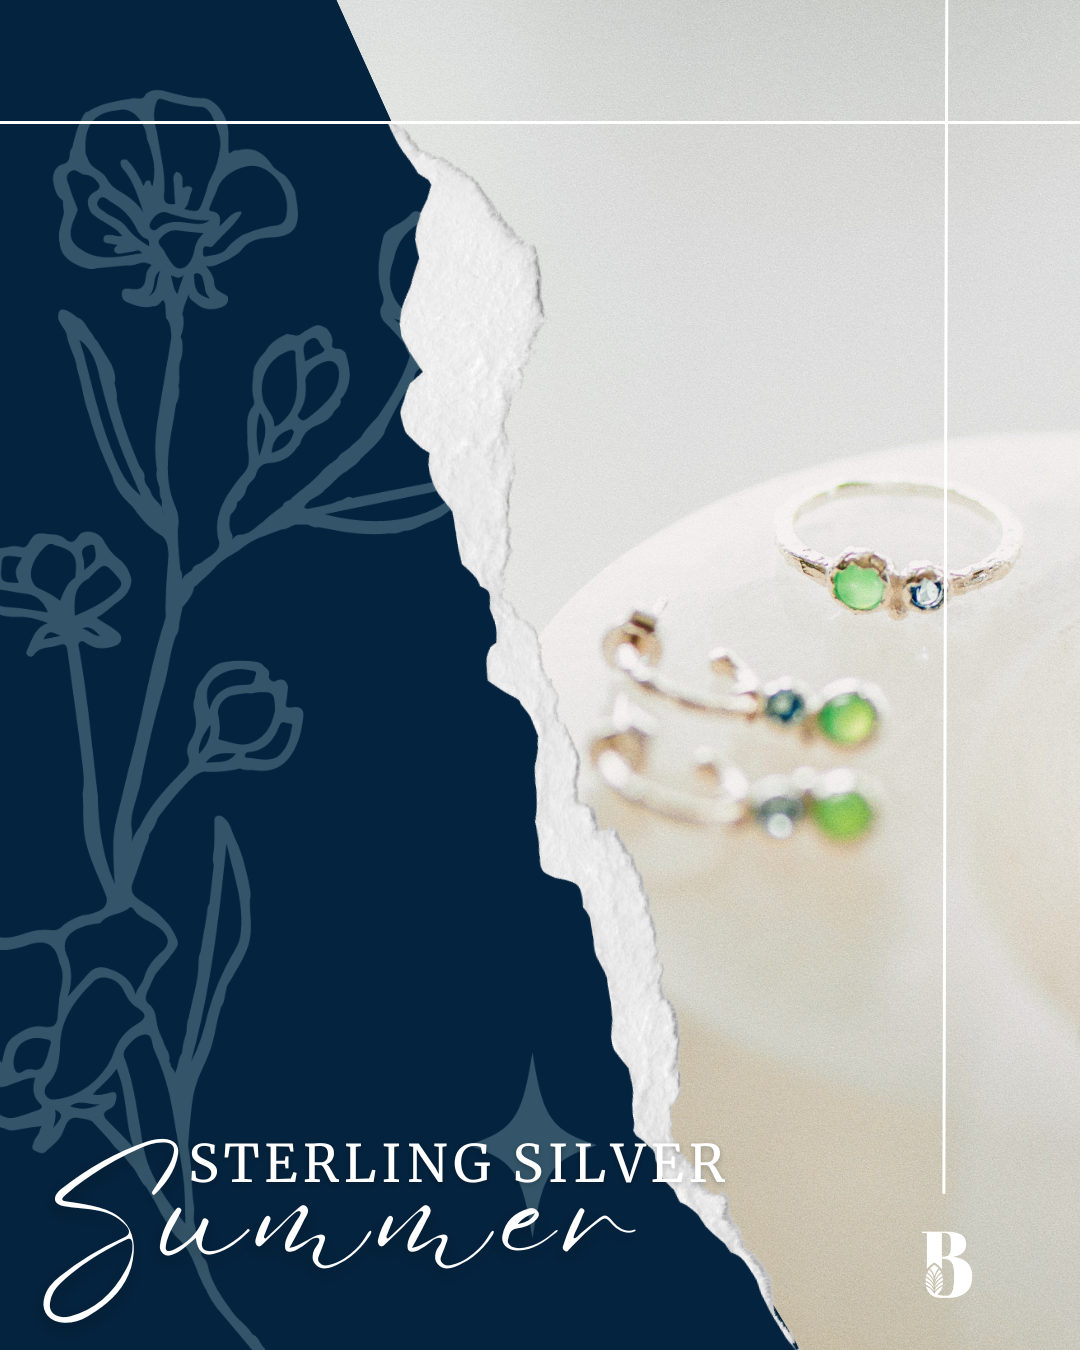 Hold tight to that summer feeling with hot, hot, hot Sterling Silver!